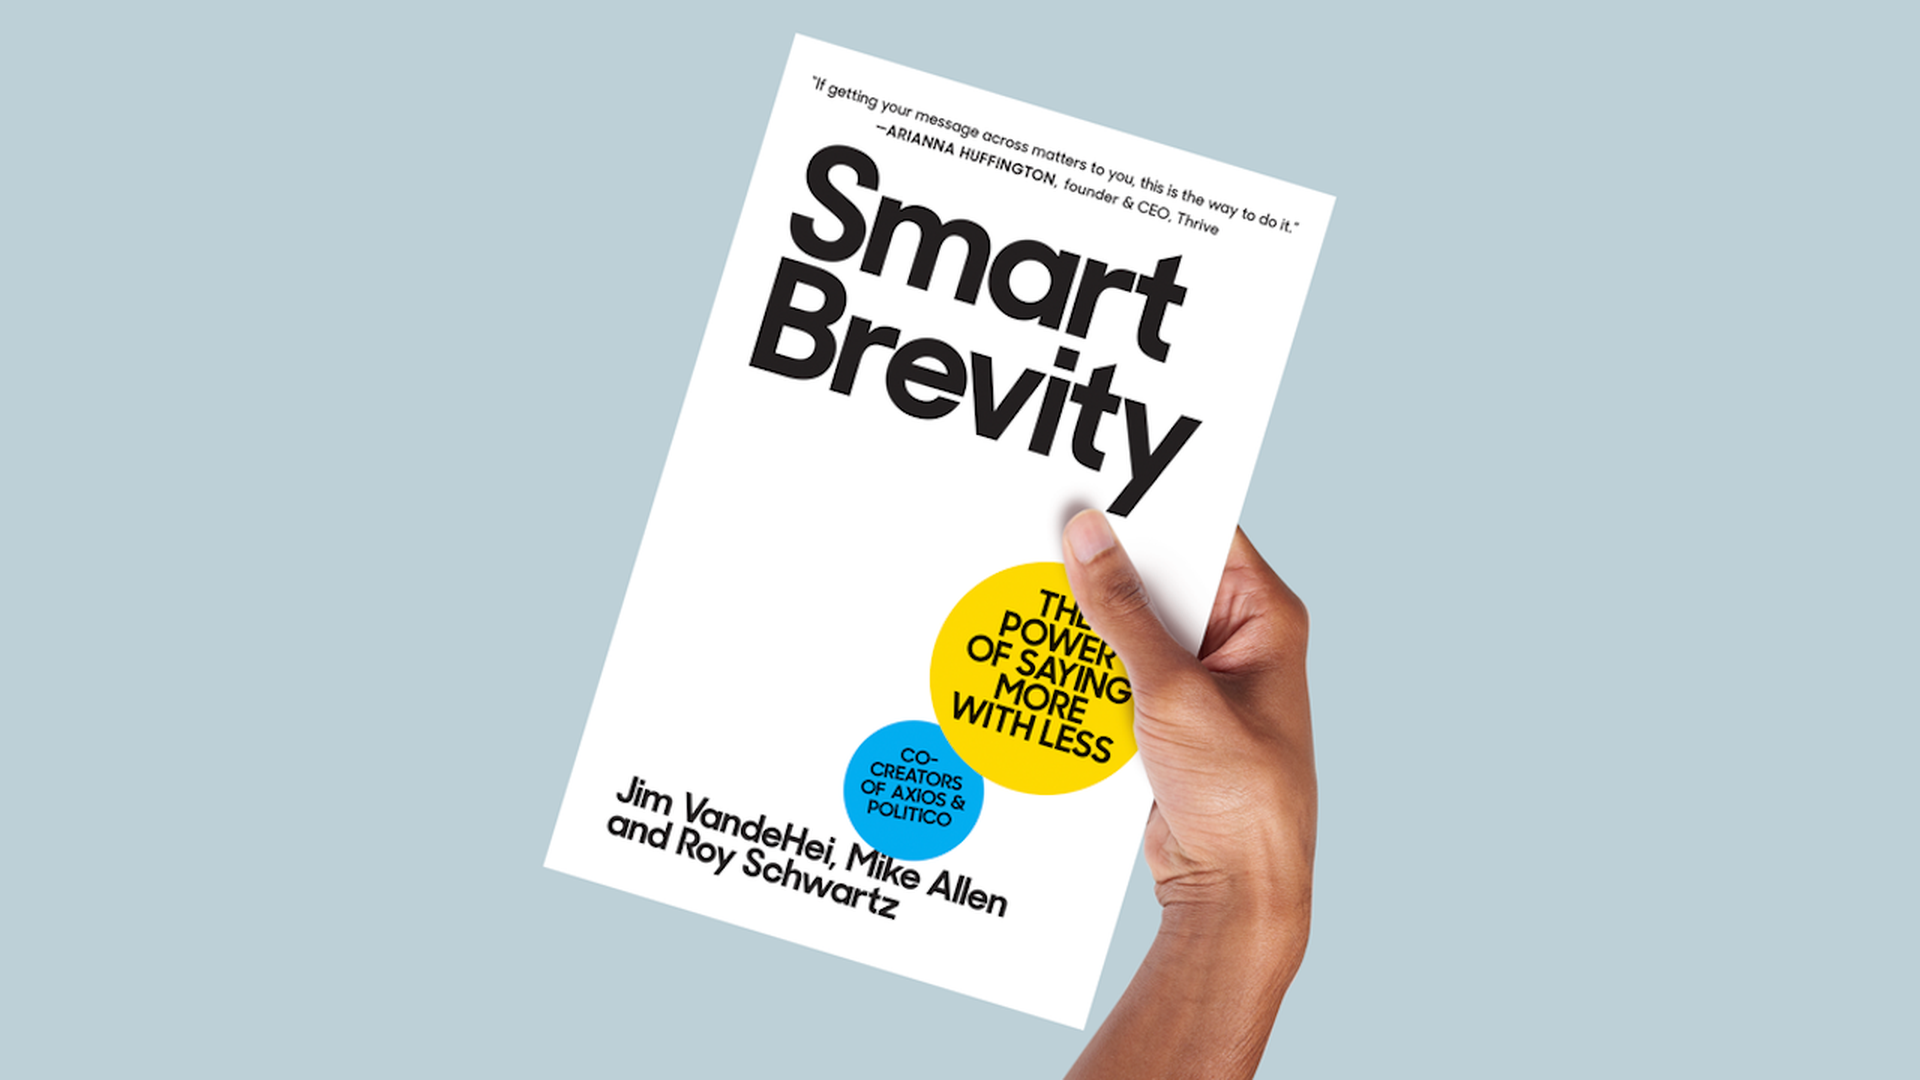 Image of the Axios Smart Brevity book